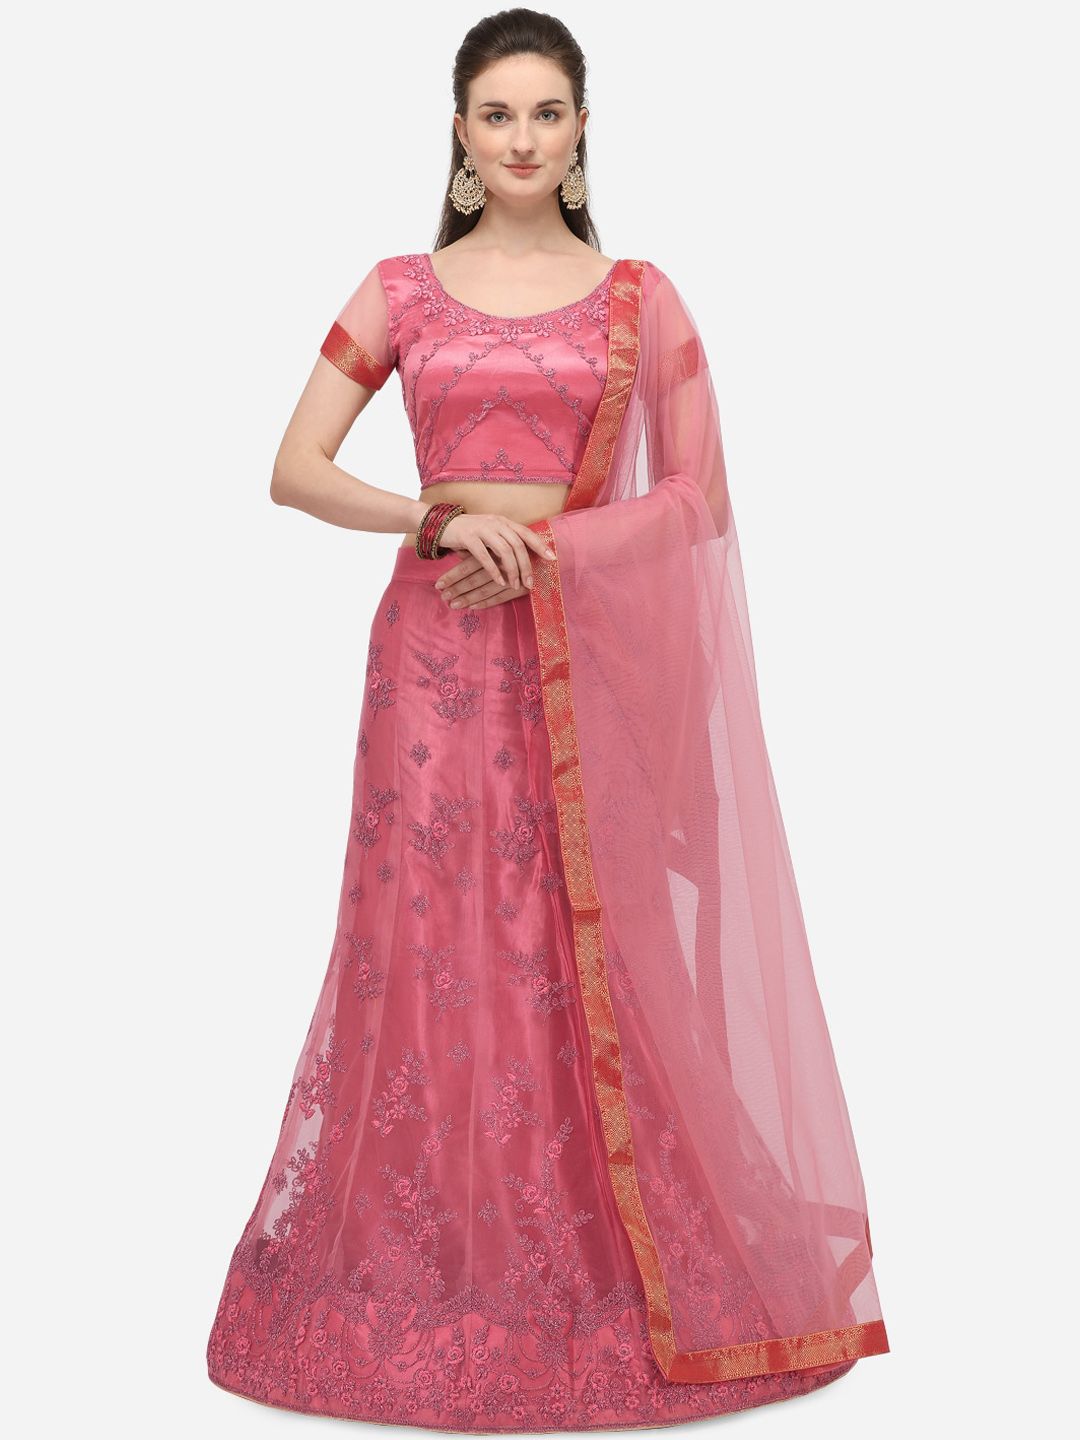 Netram Pink Semi-Stitched Lehenga & Blouse with Dupatta Price in India